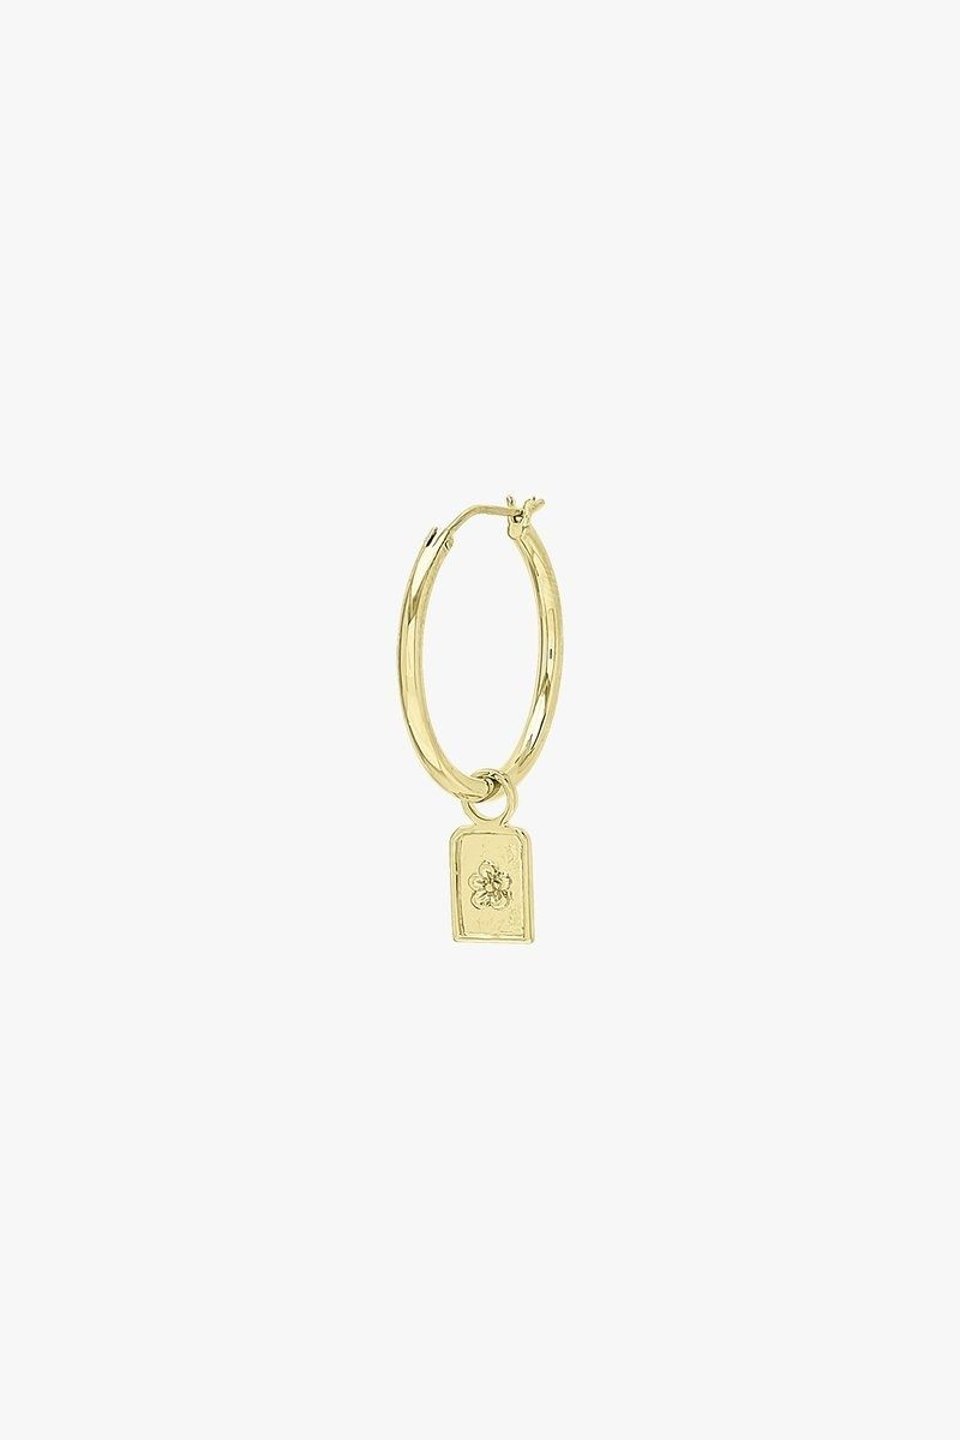 Wildthings Sauvage Earring Charm - Gold